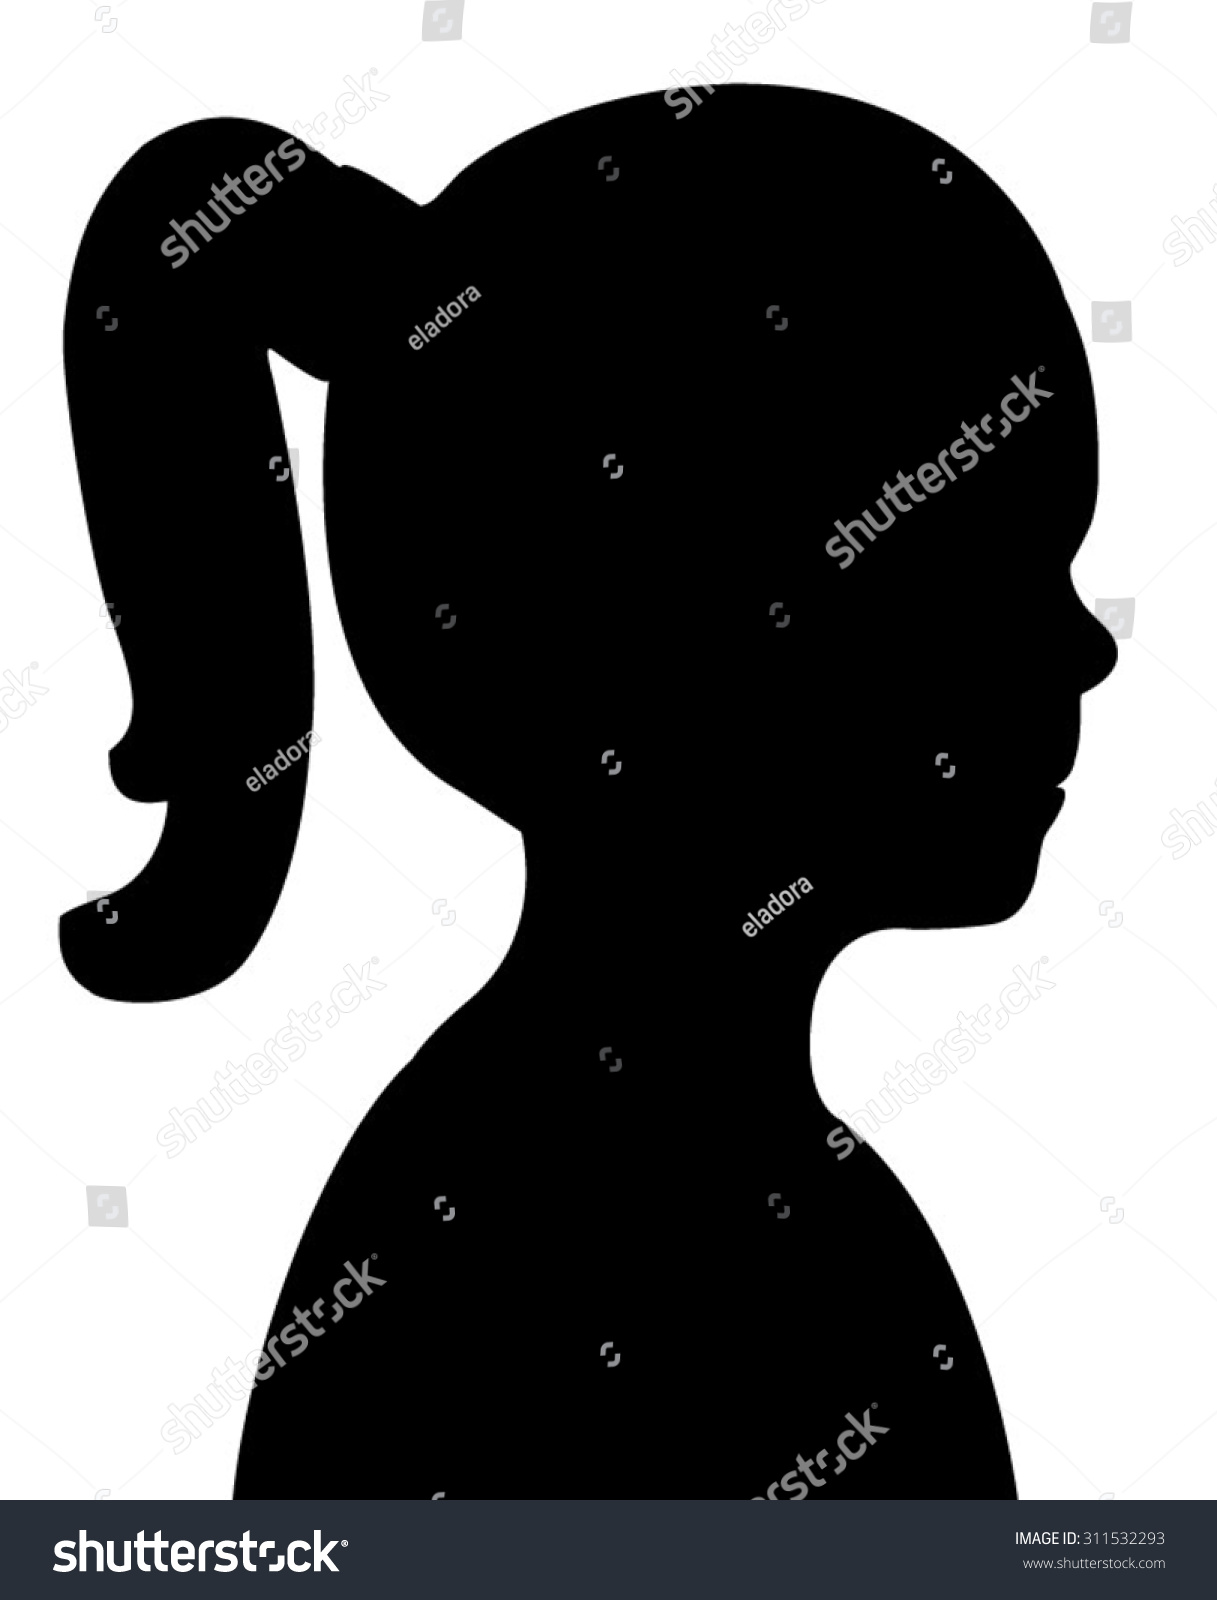 Child Head Silhouette Vector Stock Vector (Royalty Free) 311532293